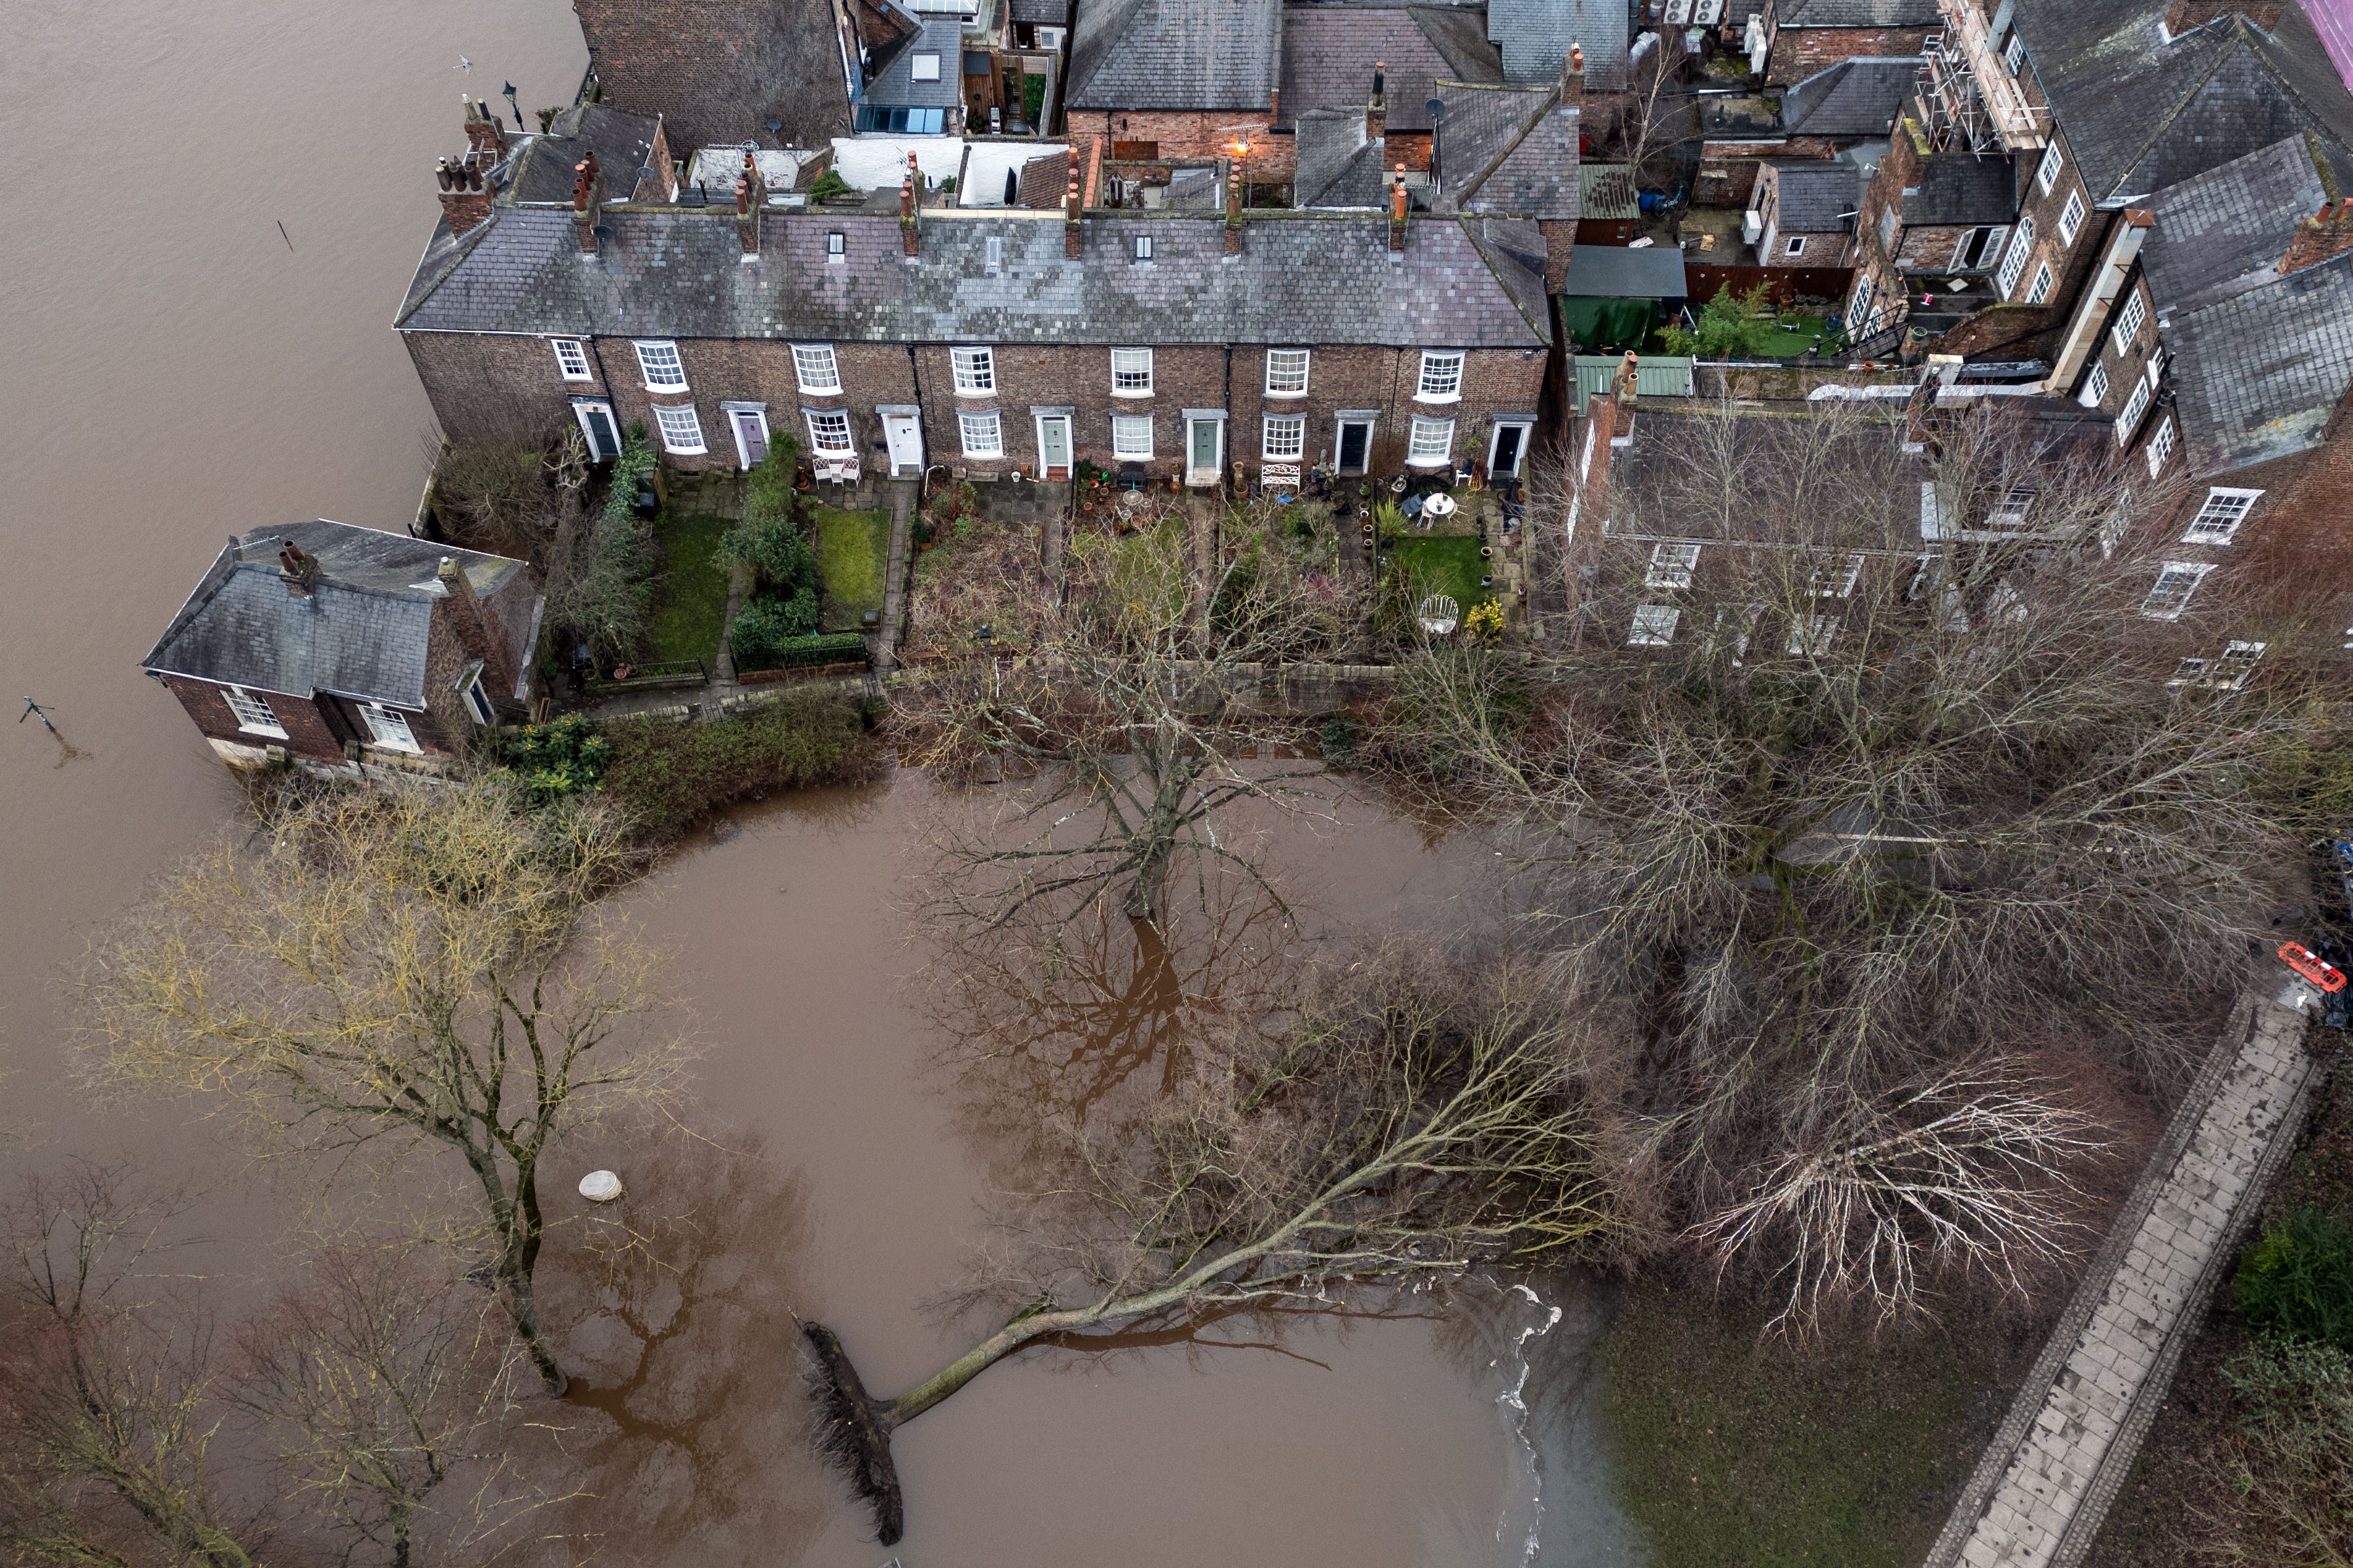 A fallen tree in floodwater in York following storms in January (Danny Lawson/PA)